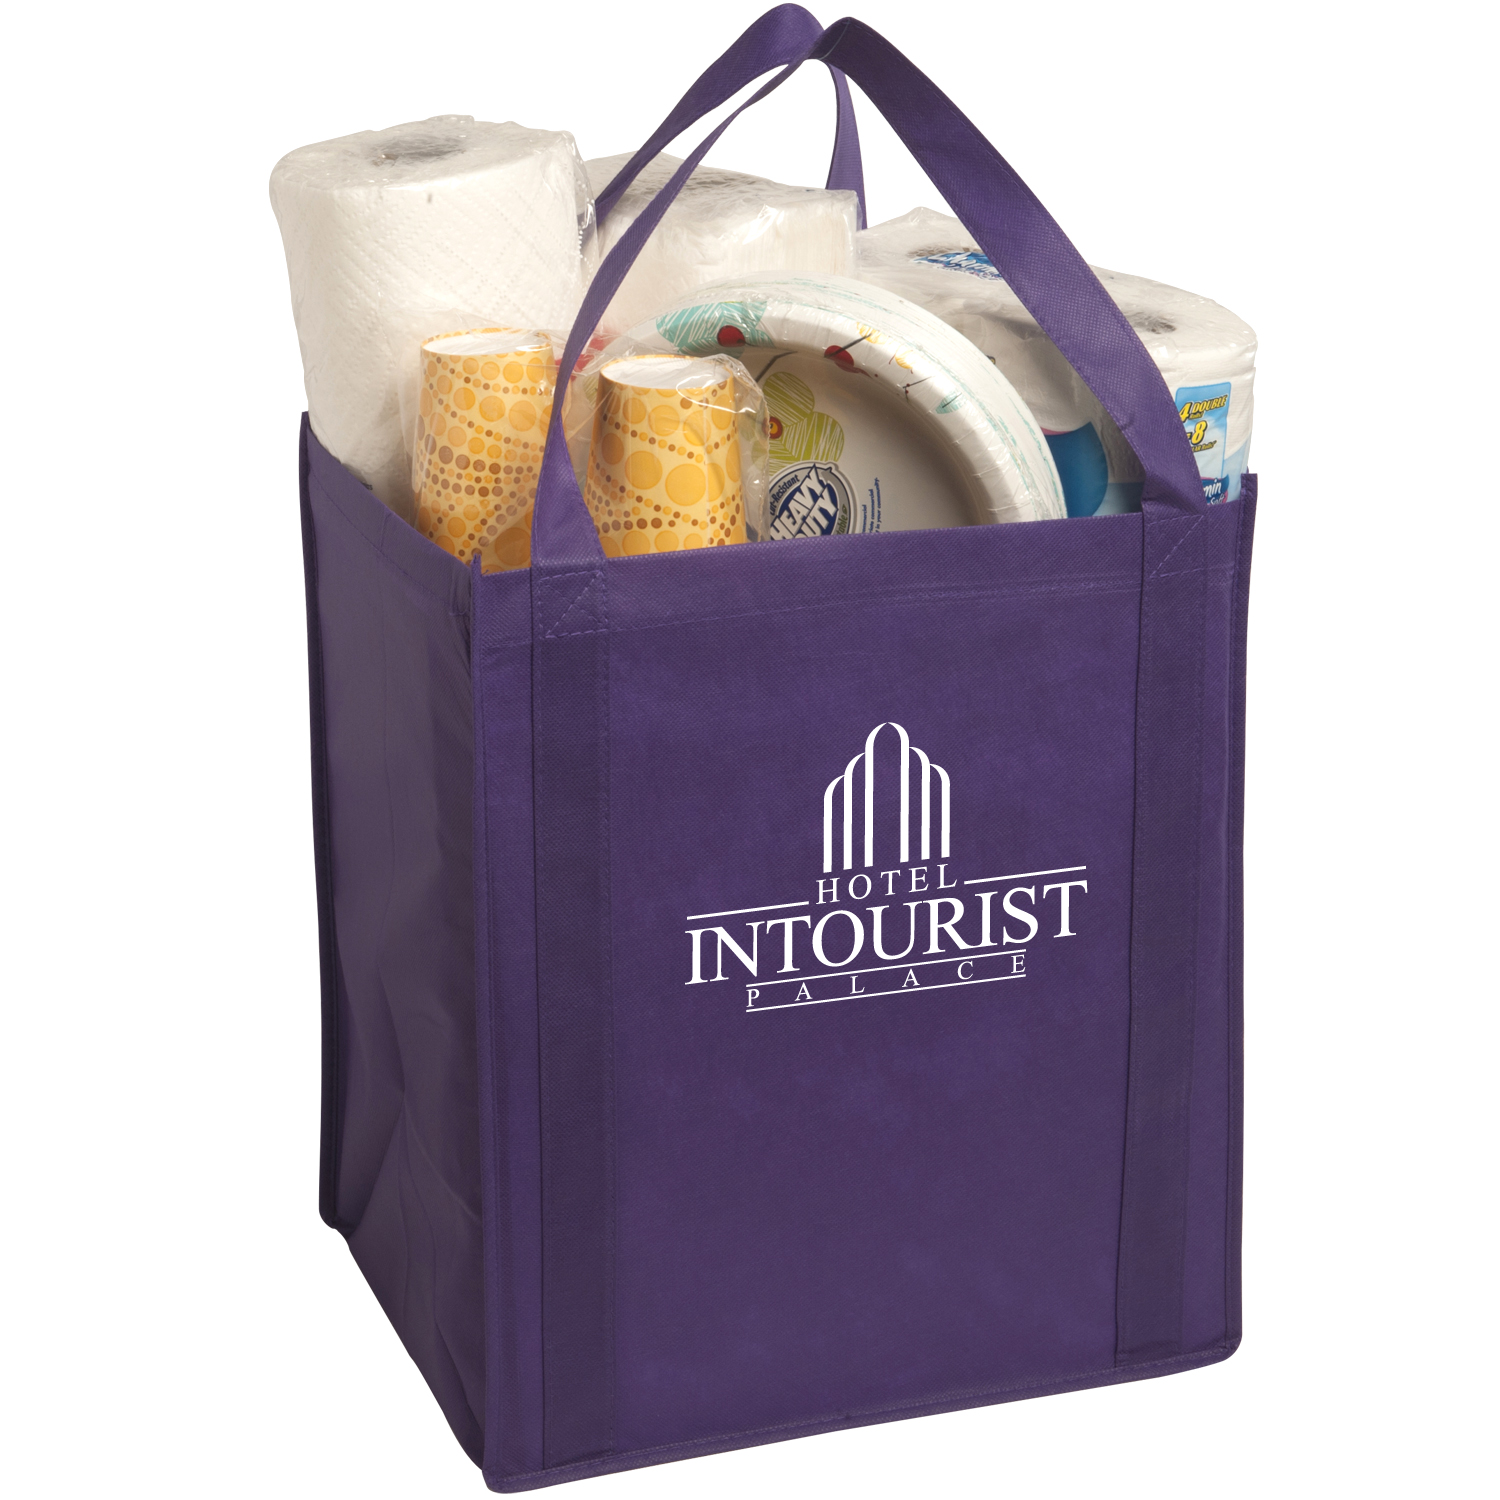 Large Non-Woven Grocery Tote